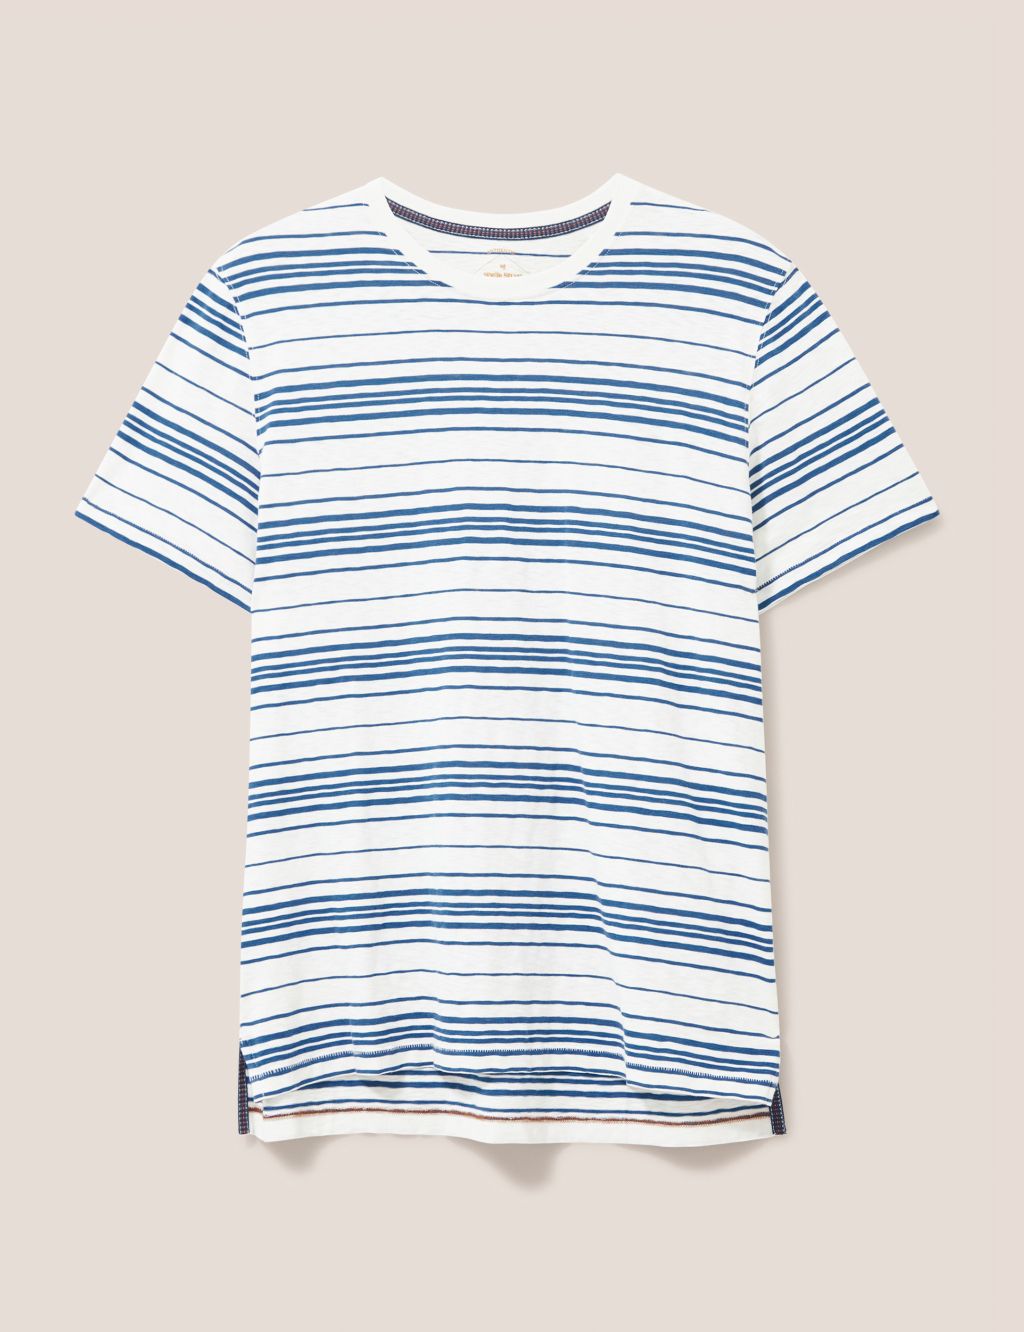 Relaxed Fit Pure Cotton Striped T-Shirt image 2